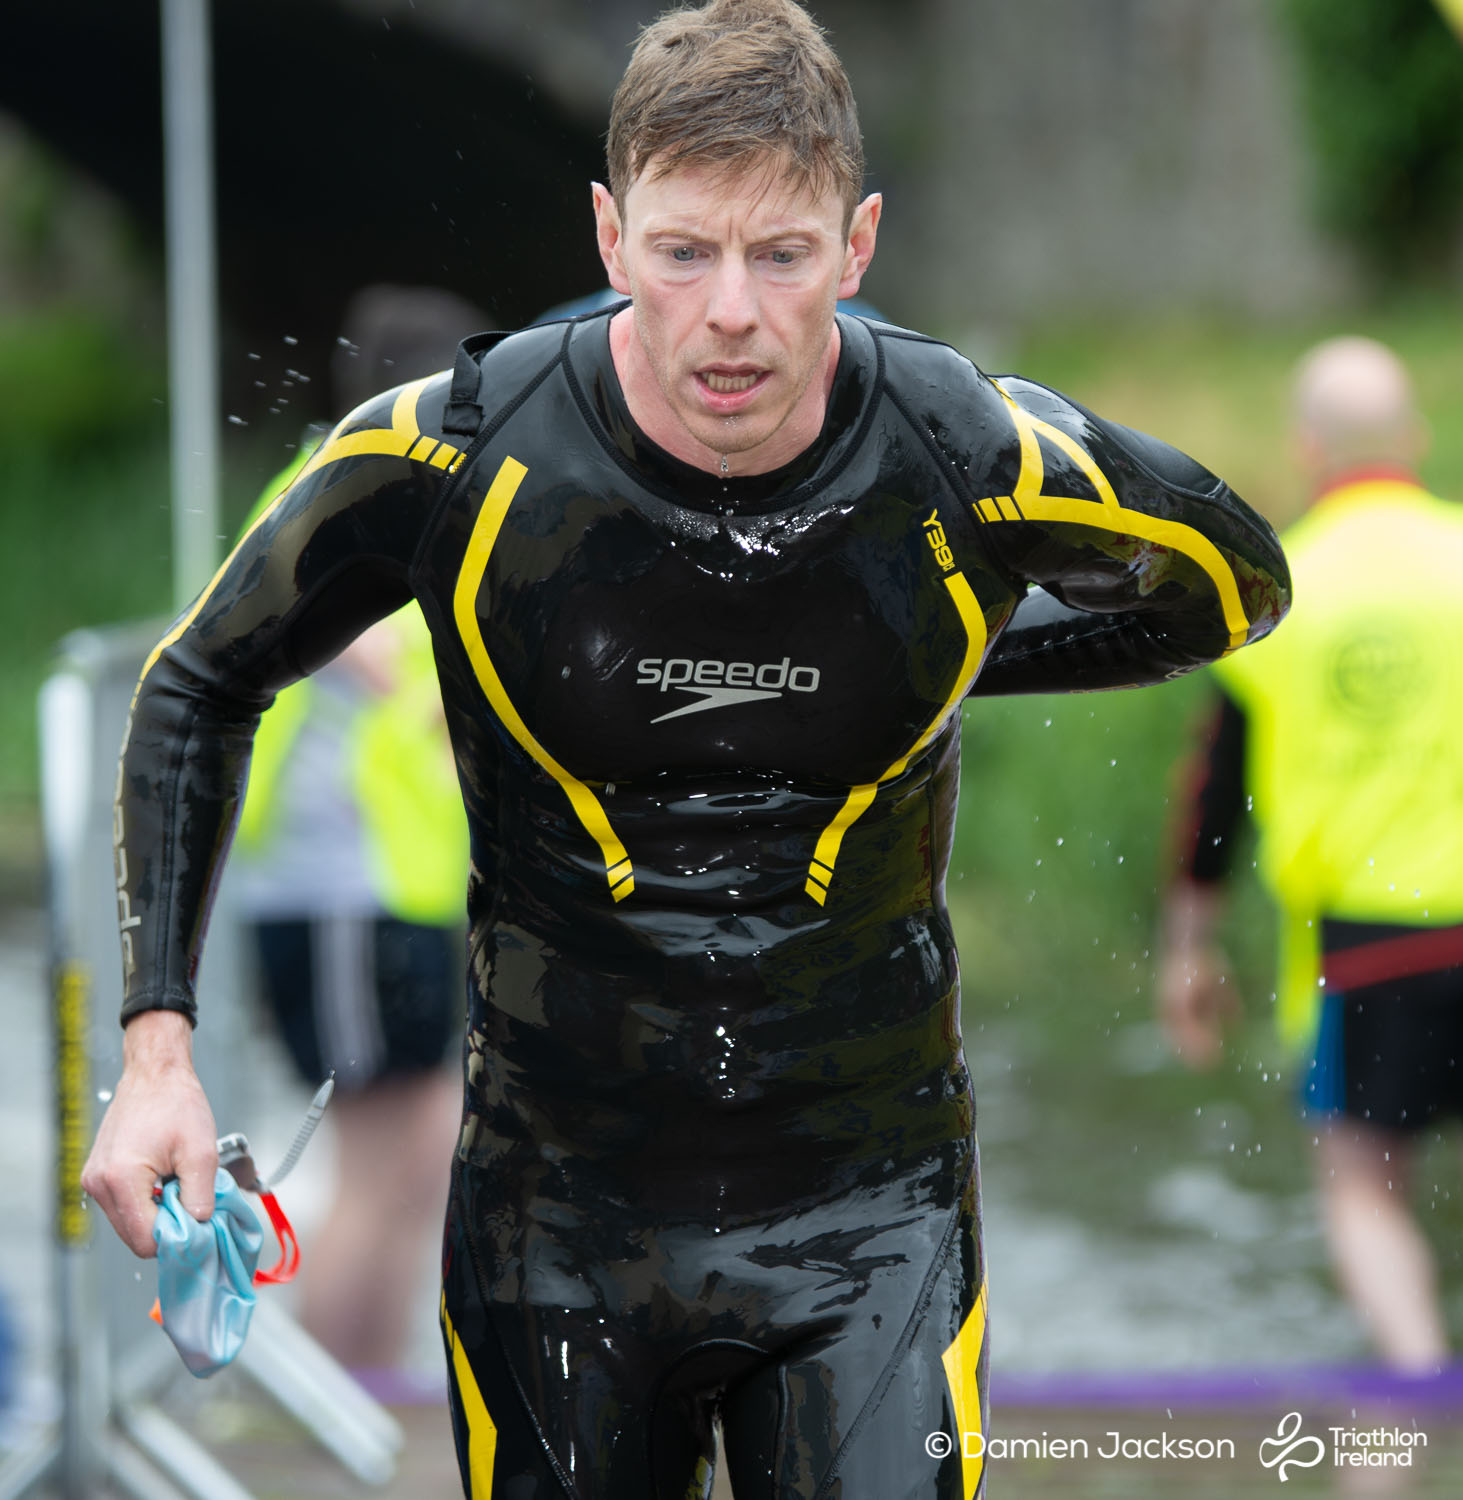 Athy_2018 (210 of 526) - TriAthy - XII Edition - 2nd June 2018